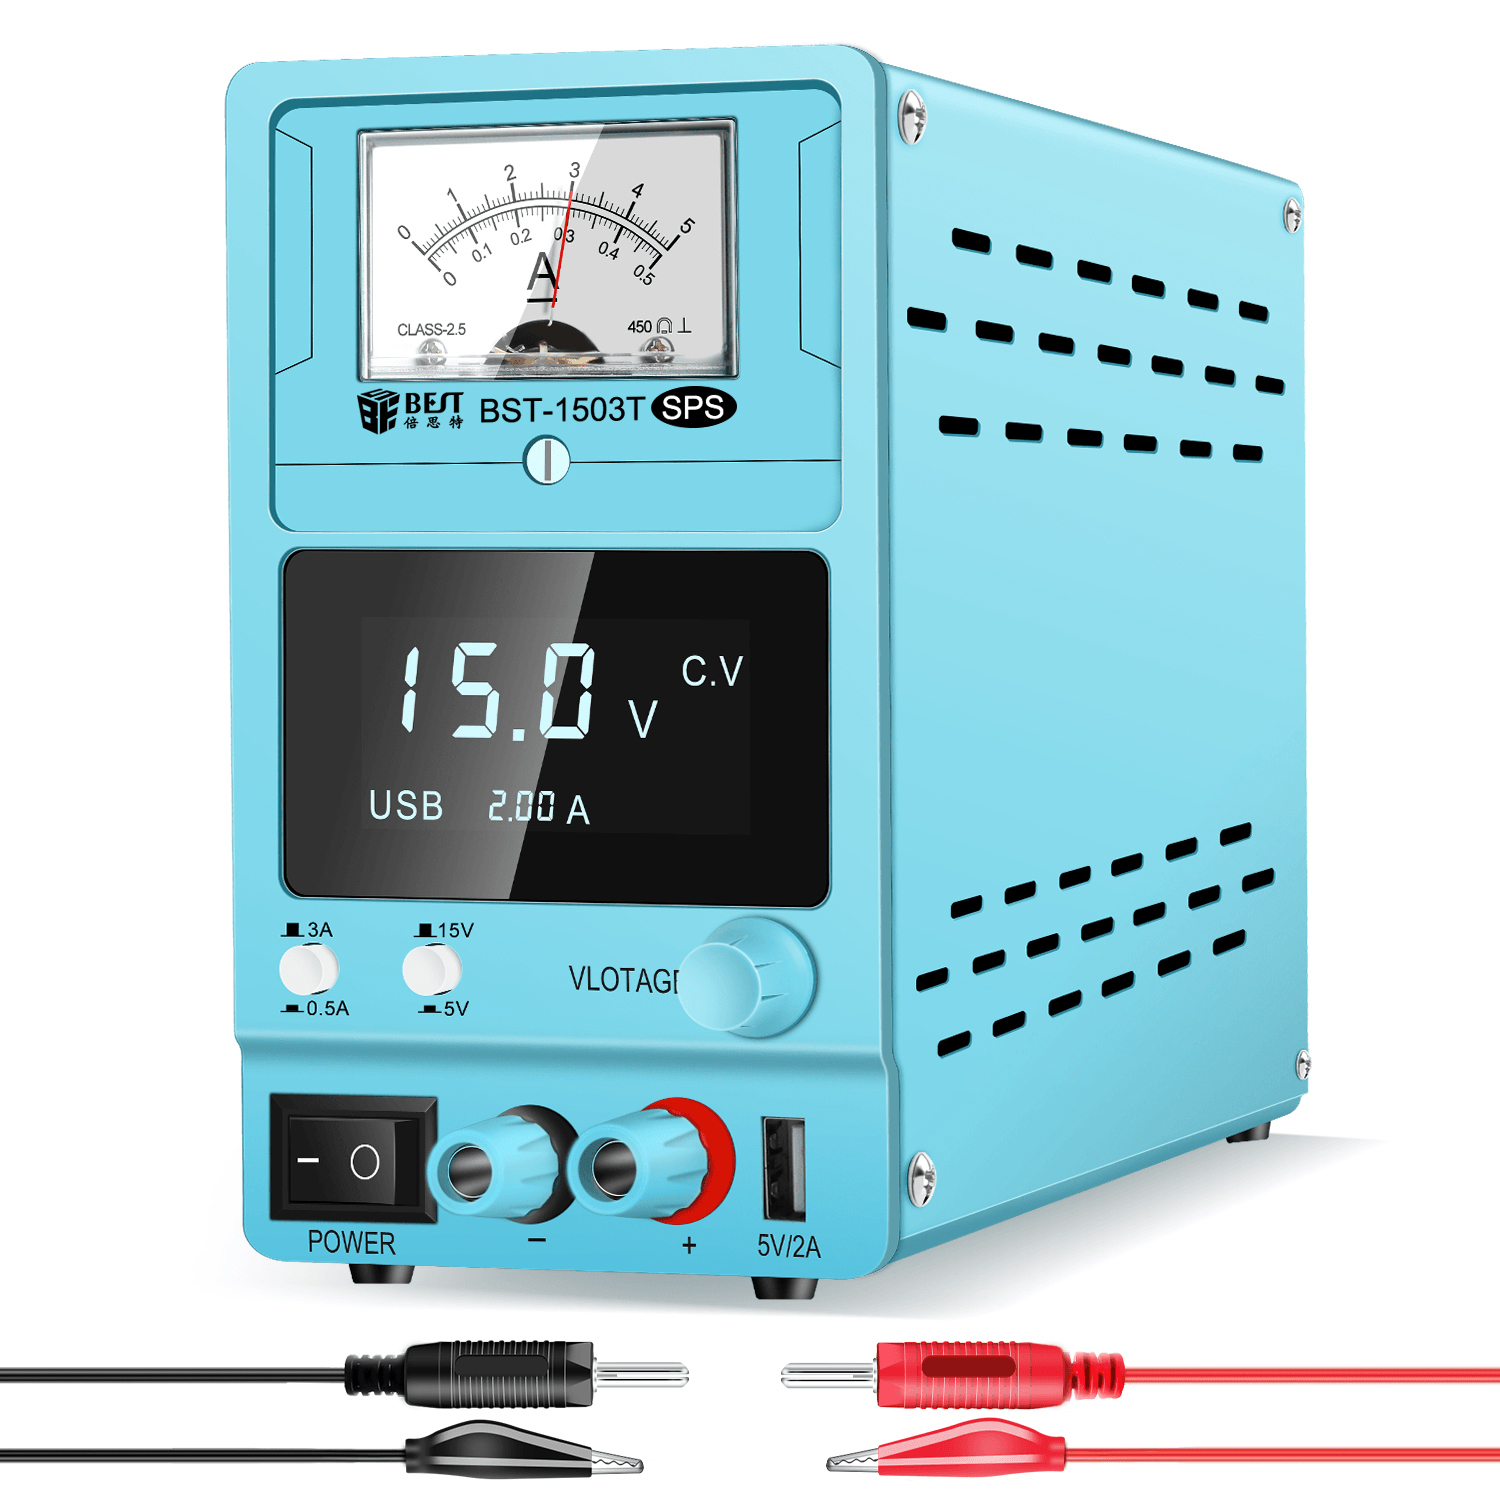 DC Power Supply Variable: 15V 3A Adjustable Switching Regulated LED Display 5V/2A USB Port Test Lead Output & Input Power Cord Bench Lab Power Supplies